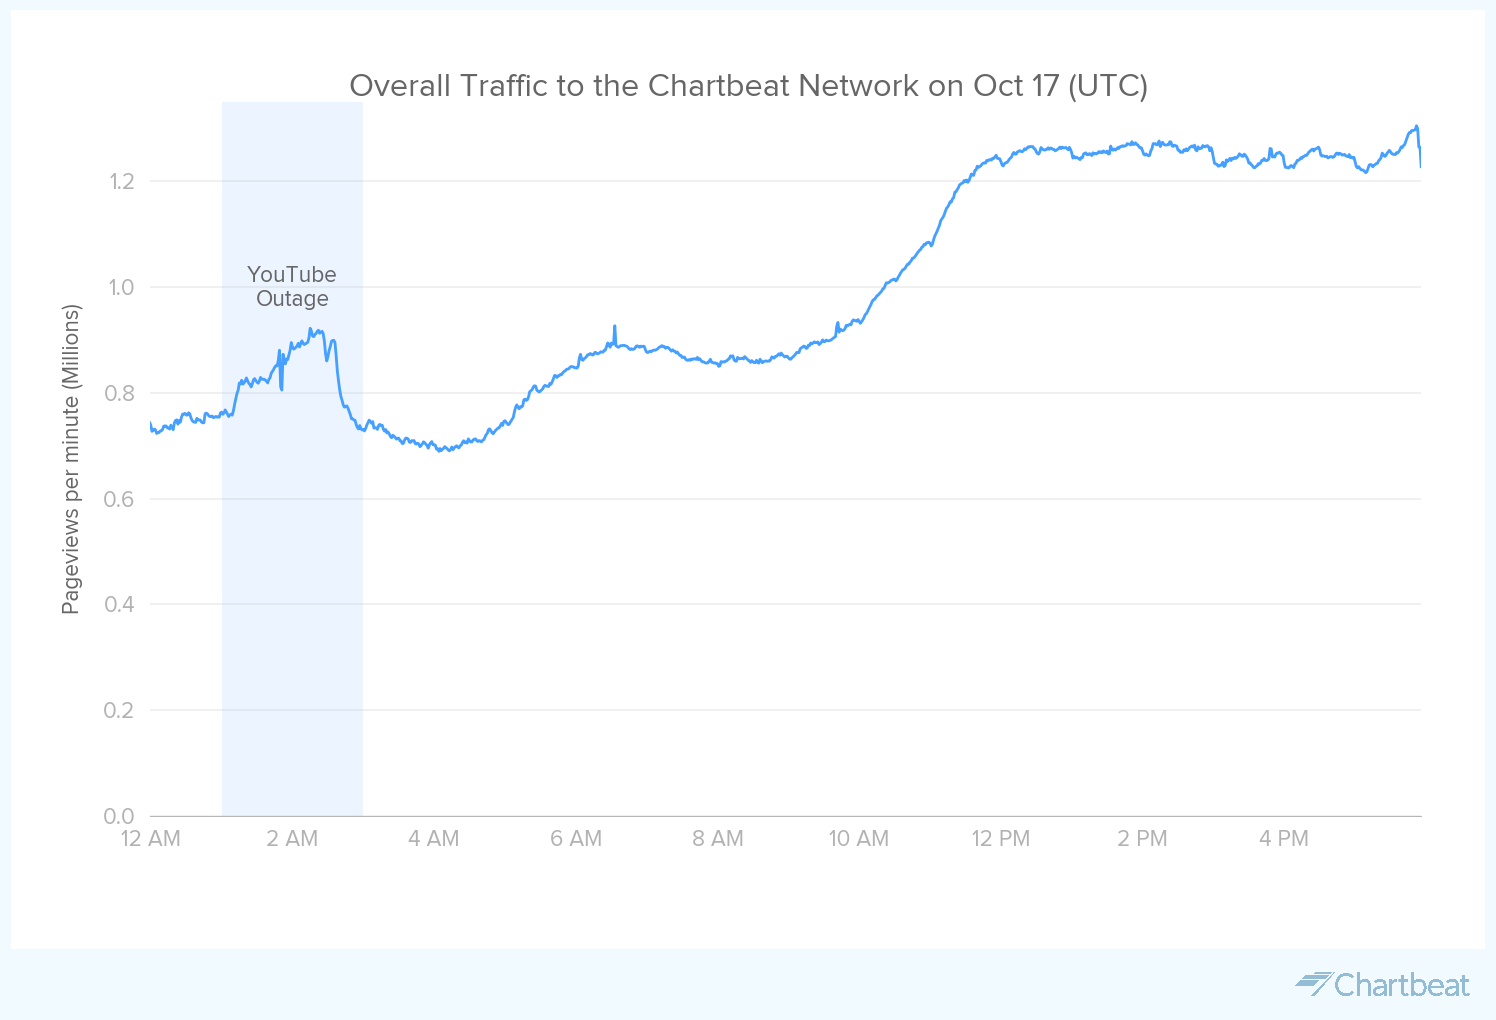 Overall Traffic to the Chartbeat Network on Oct. 17